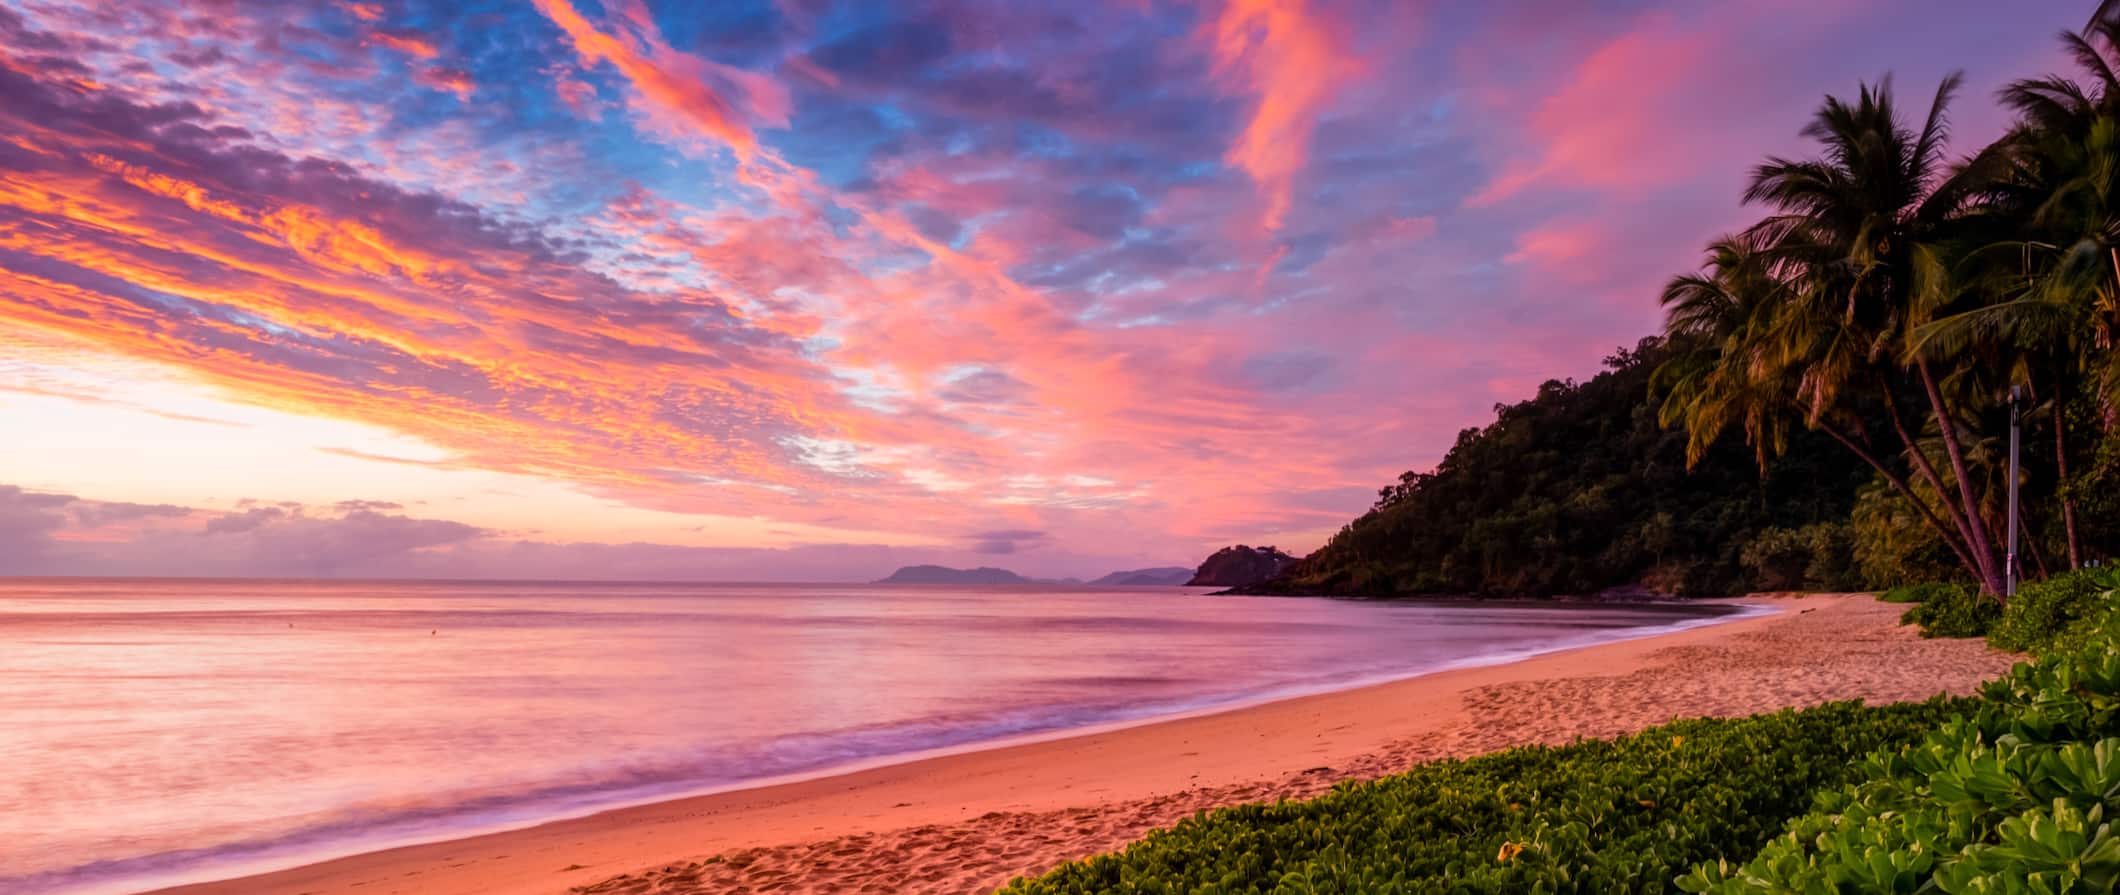 A vivid, pink sunset along the water in Cairns, Australia